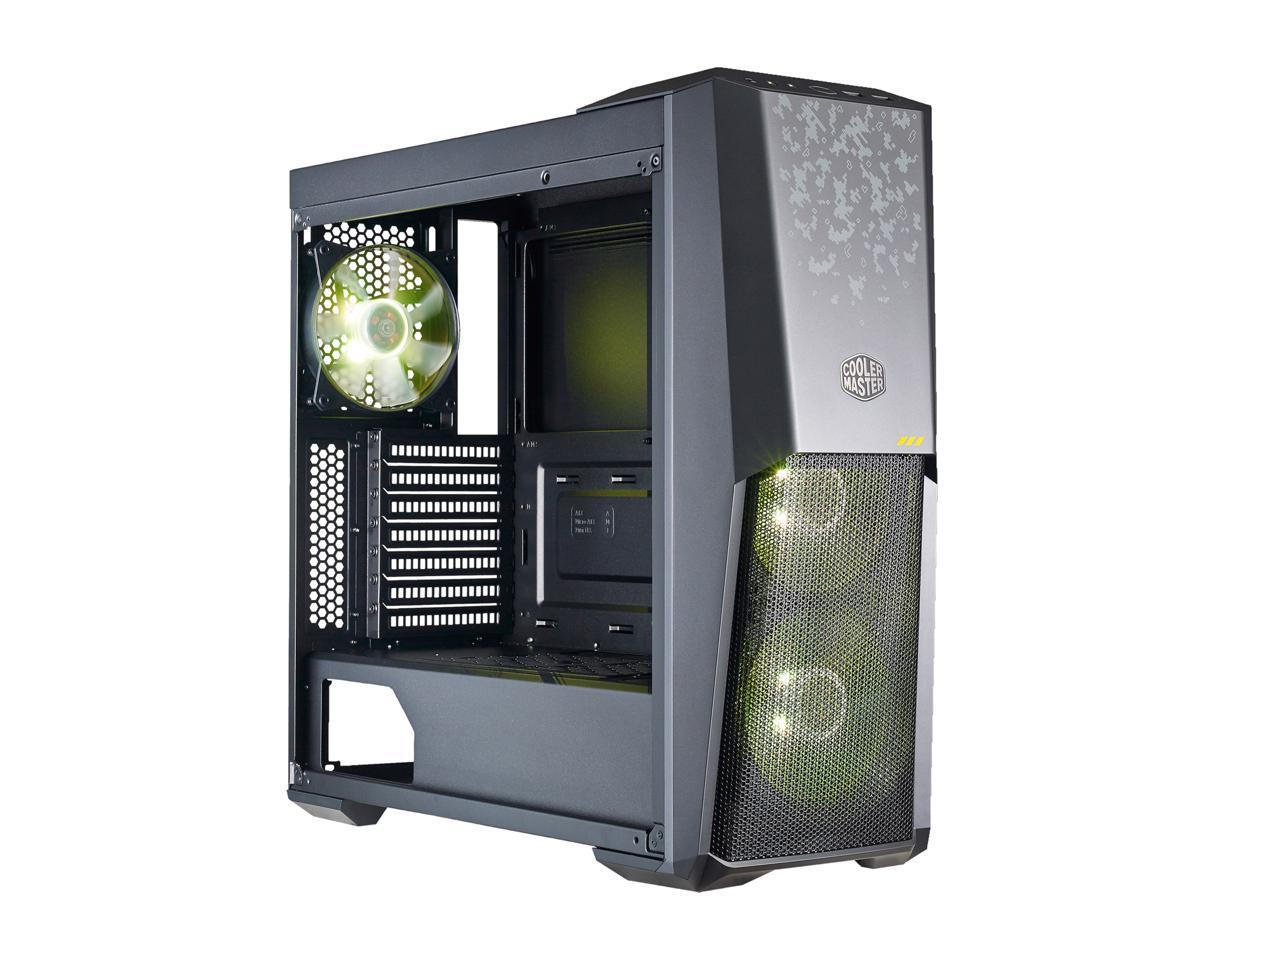 Cooler Master Masterbox Mb500 Tuf Gaming Alliance Edition Atx Mid Tower W Tuf Aesthetic Design Semi Meshed Front Ventilation Tempered Glass Side Panel 3 X 1mm Rgb Fans Newegg Com